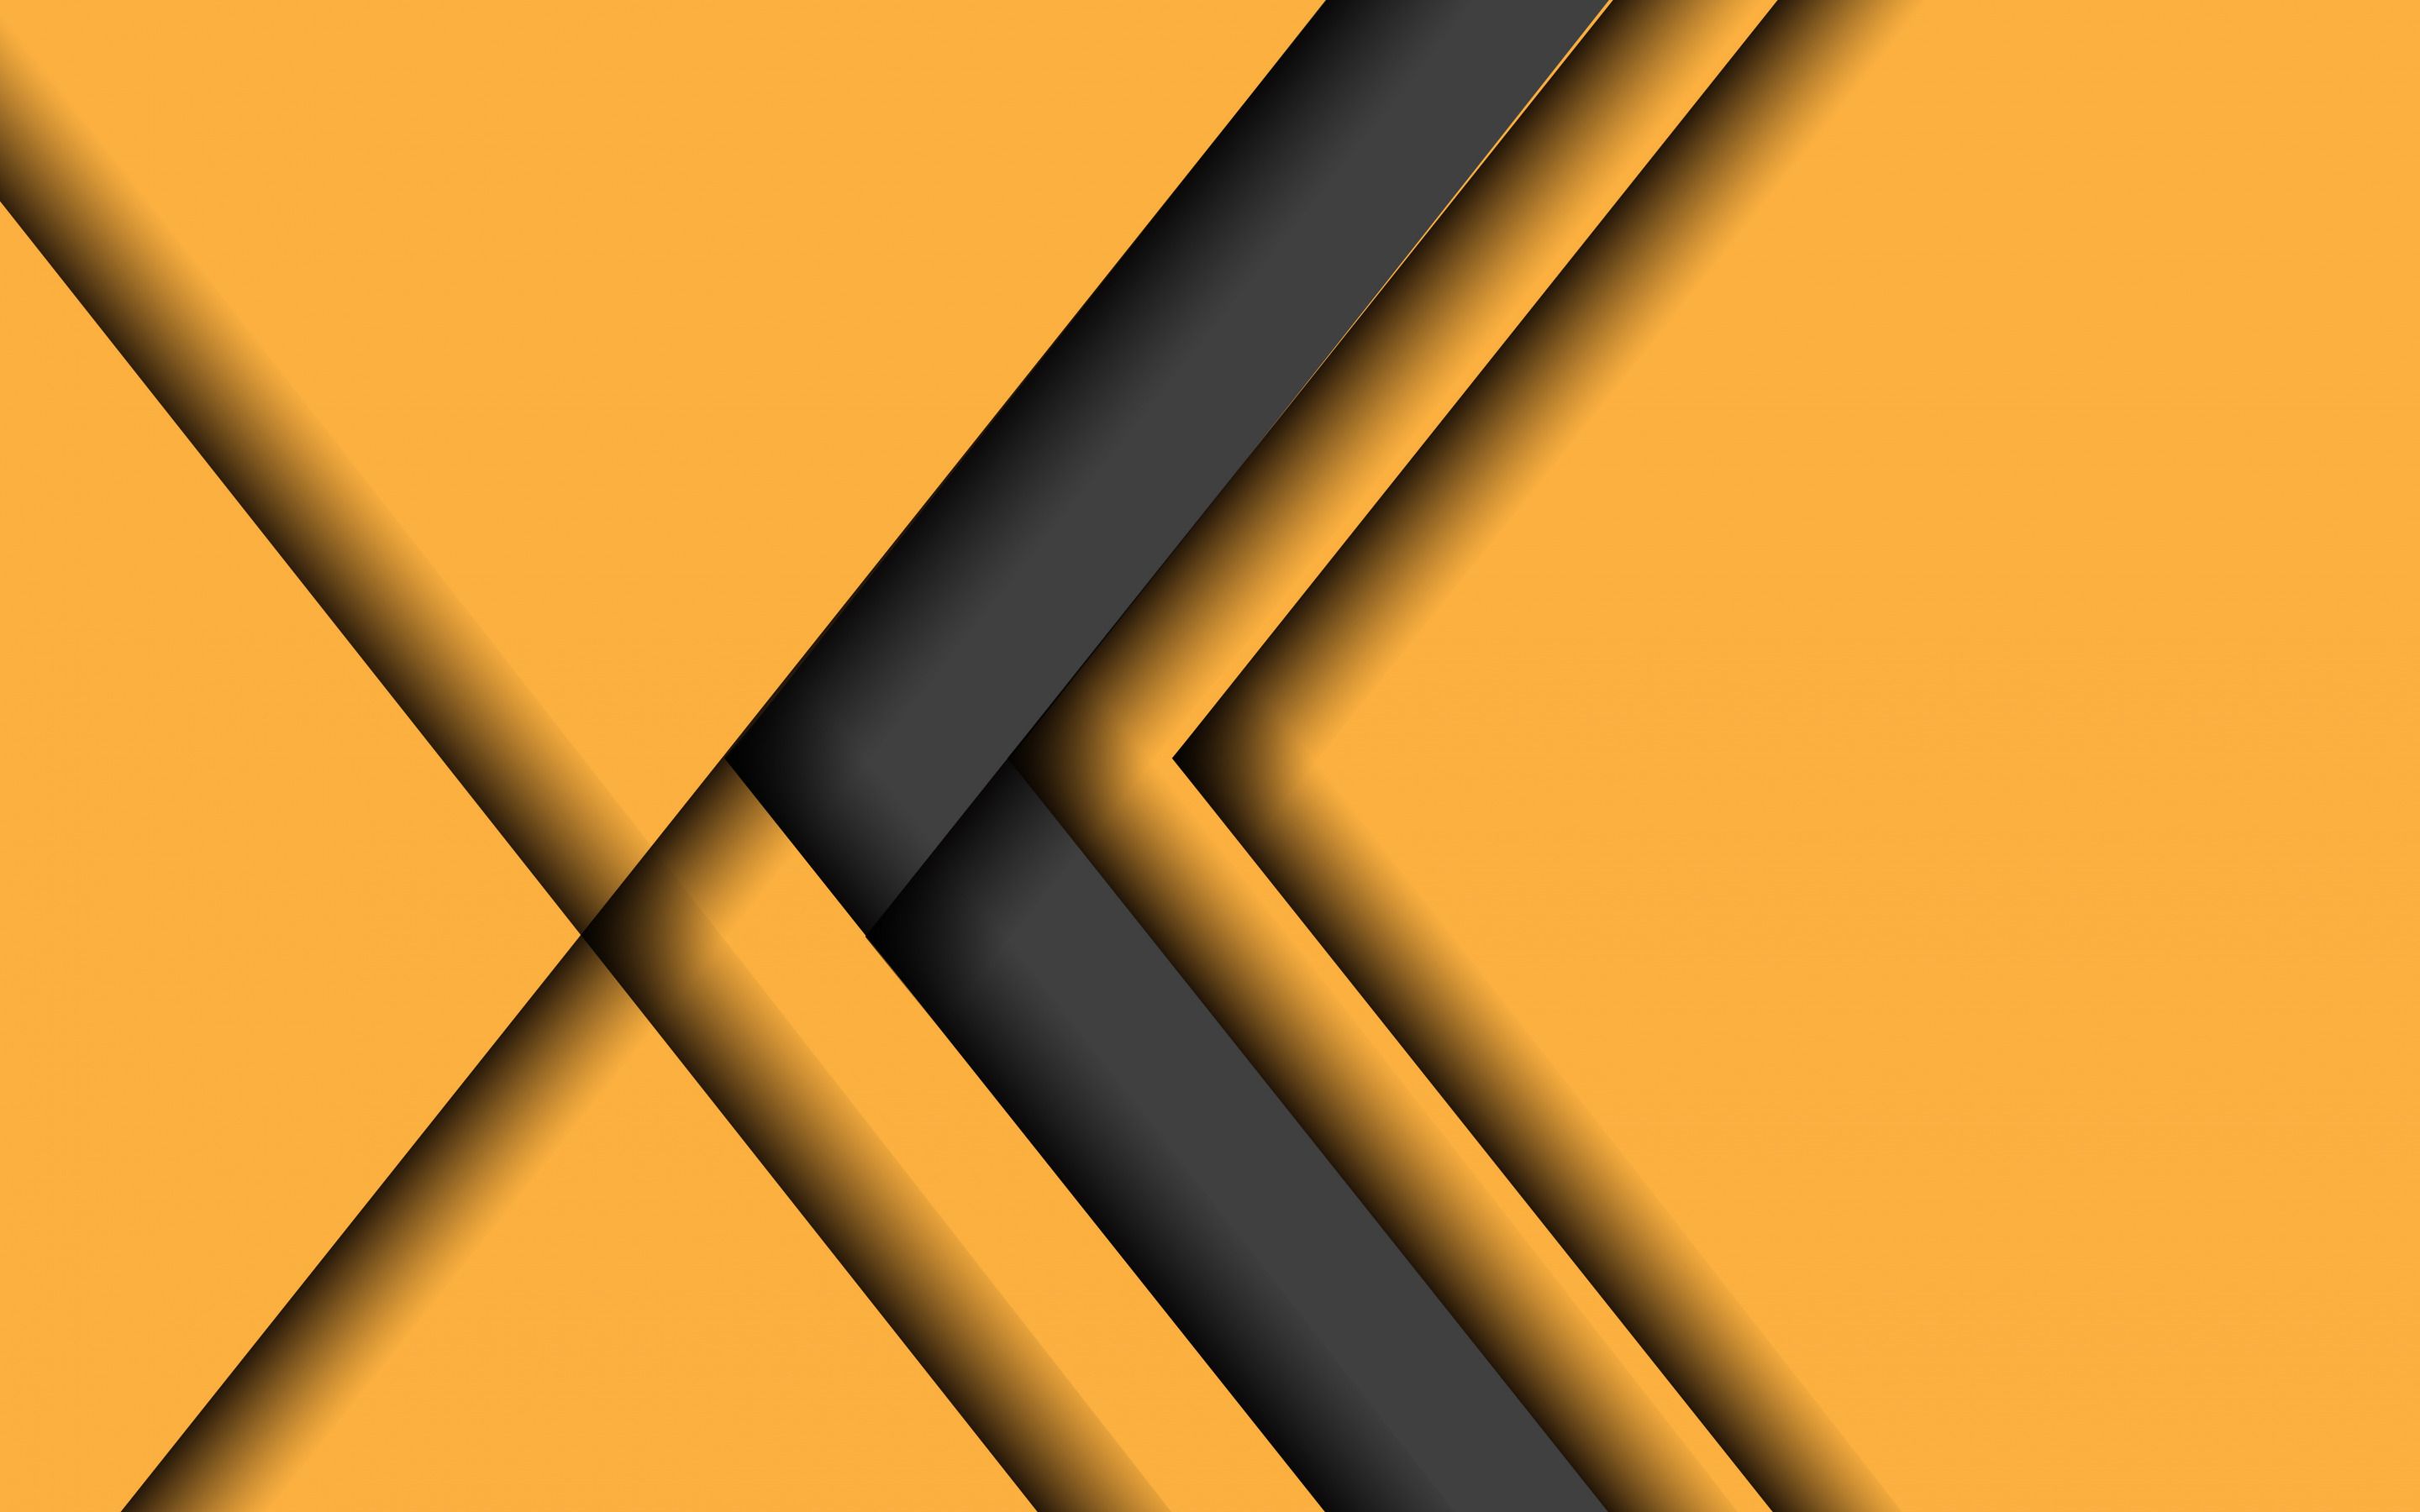 Download wallpaper yellow material background, material design, yellow- black abstraction, lines, abstract background for desktop with resolution 2880x1800. High Quality HD picture wallpaper